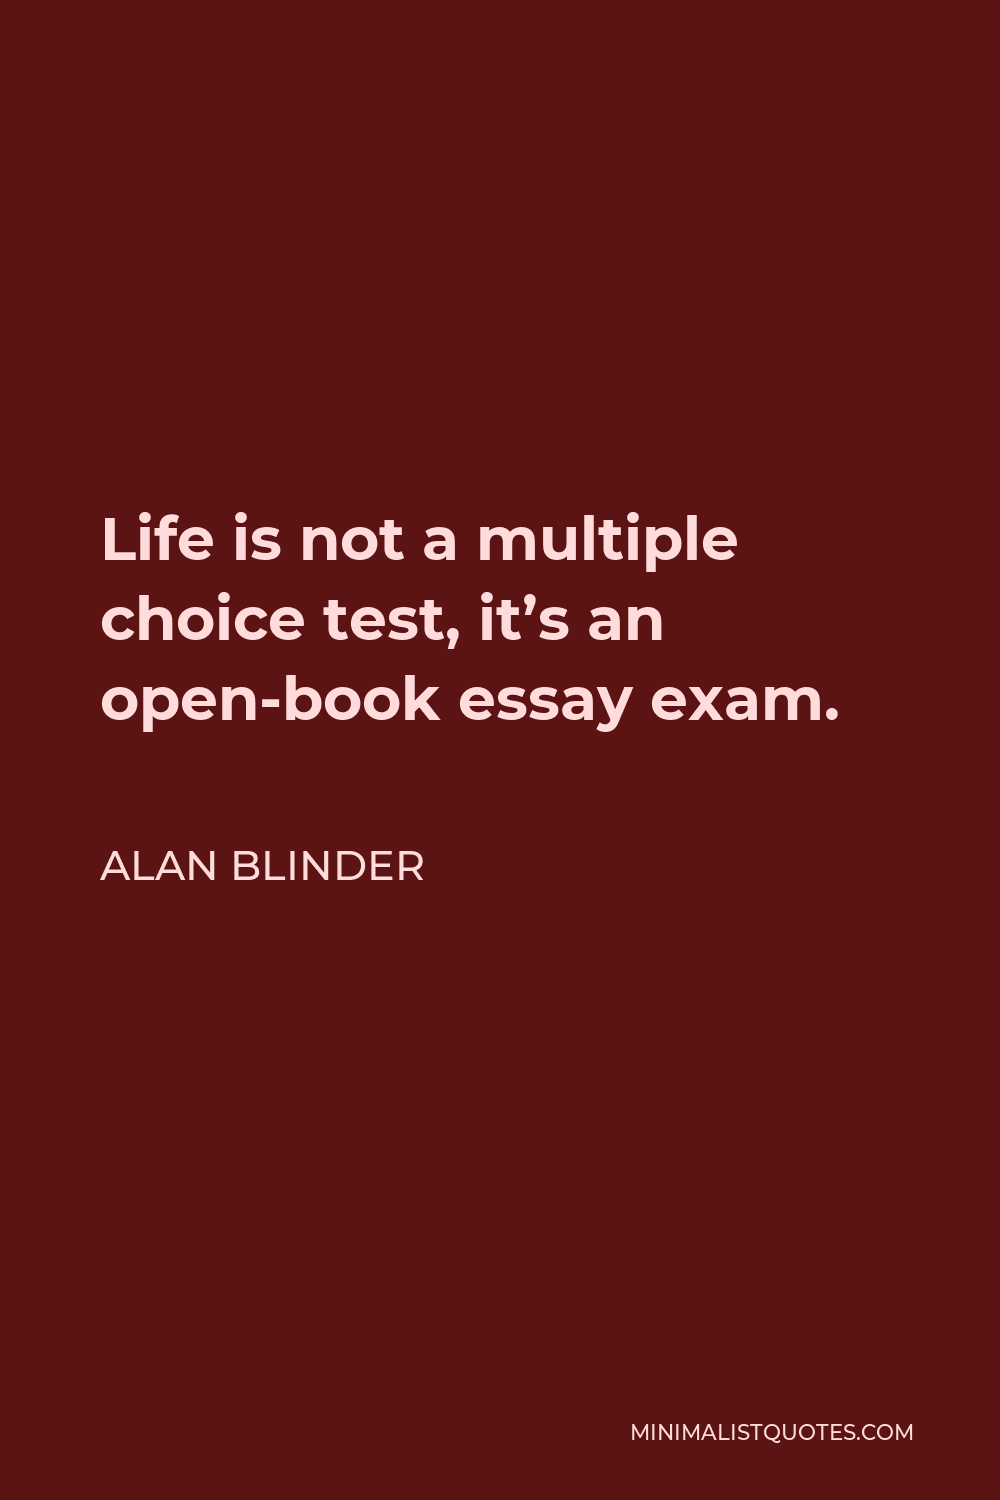 Alan Blinder Quote - Life is not a multiple choice test, it’s an open-book essay exam.